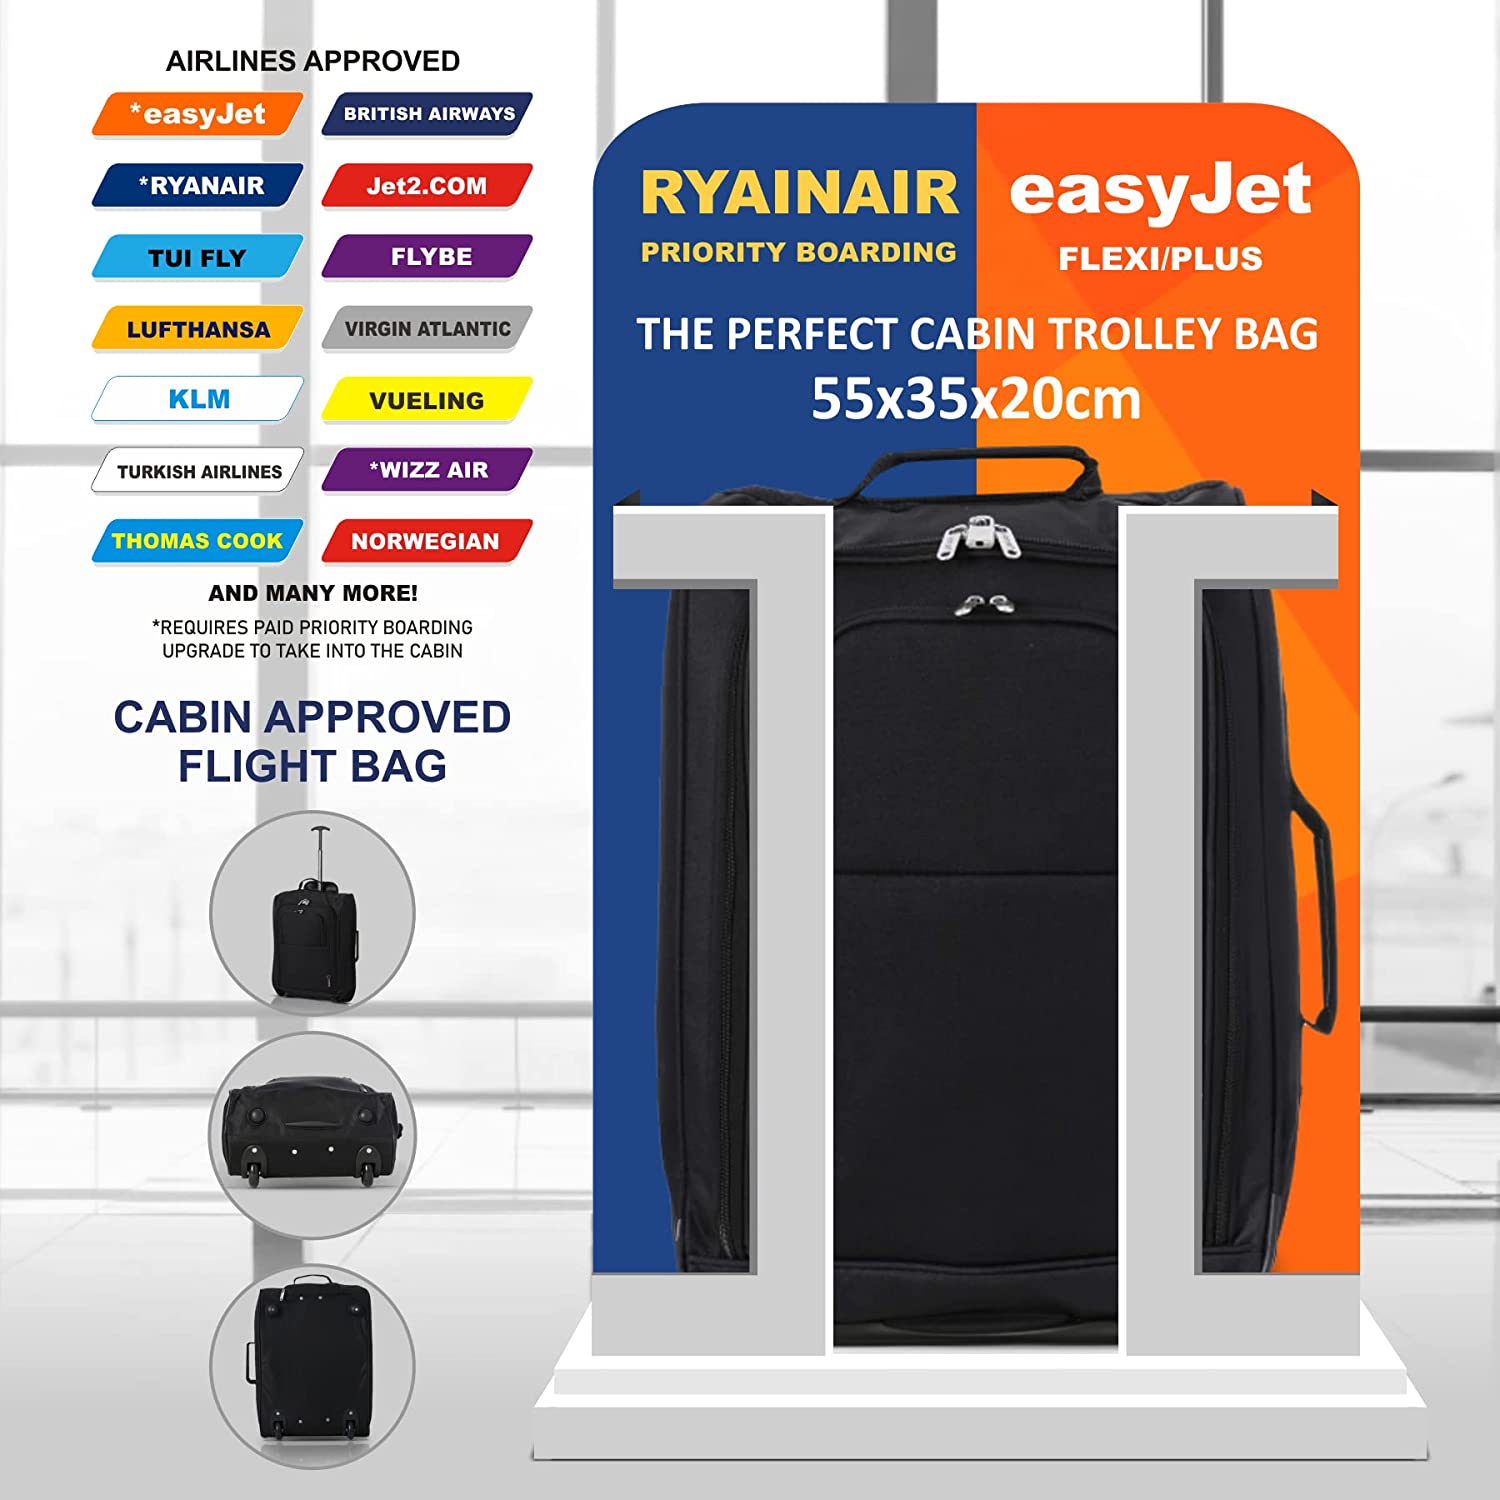 Ryanair travel bag 40x25x20 cm or 40x20x25 with multi compartments inside  and front travel suitcase with two extra front compartment size hand  luggage